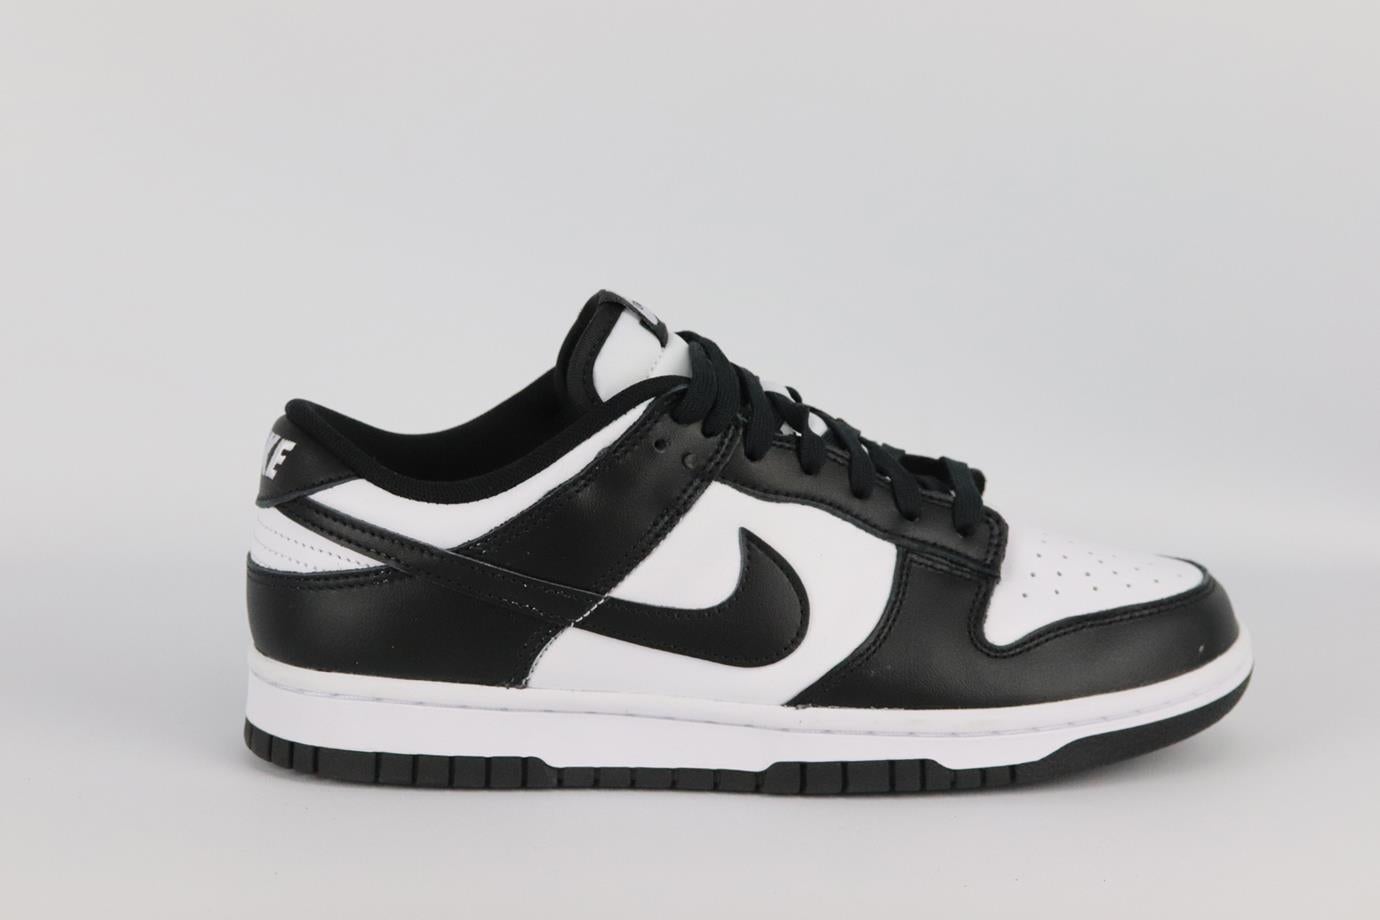 Nike Dunk Low Retro leather sneakers. Black and white. Lace up fastening at front. Comes with box. Size: EU 41 (UK 7, US 8). Insole: 10.3 in. Heel: 1 in. Very good condition - Worn once. Light wear to soles; see pictures.